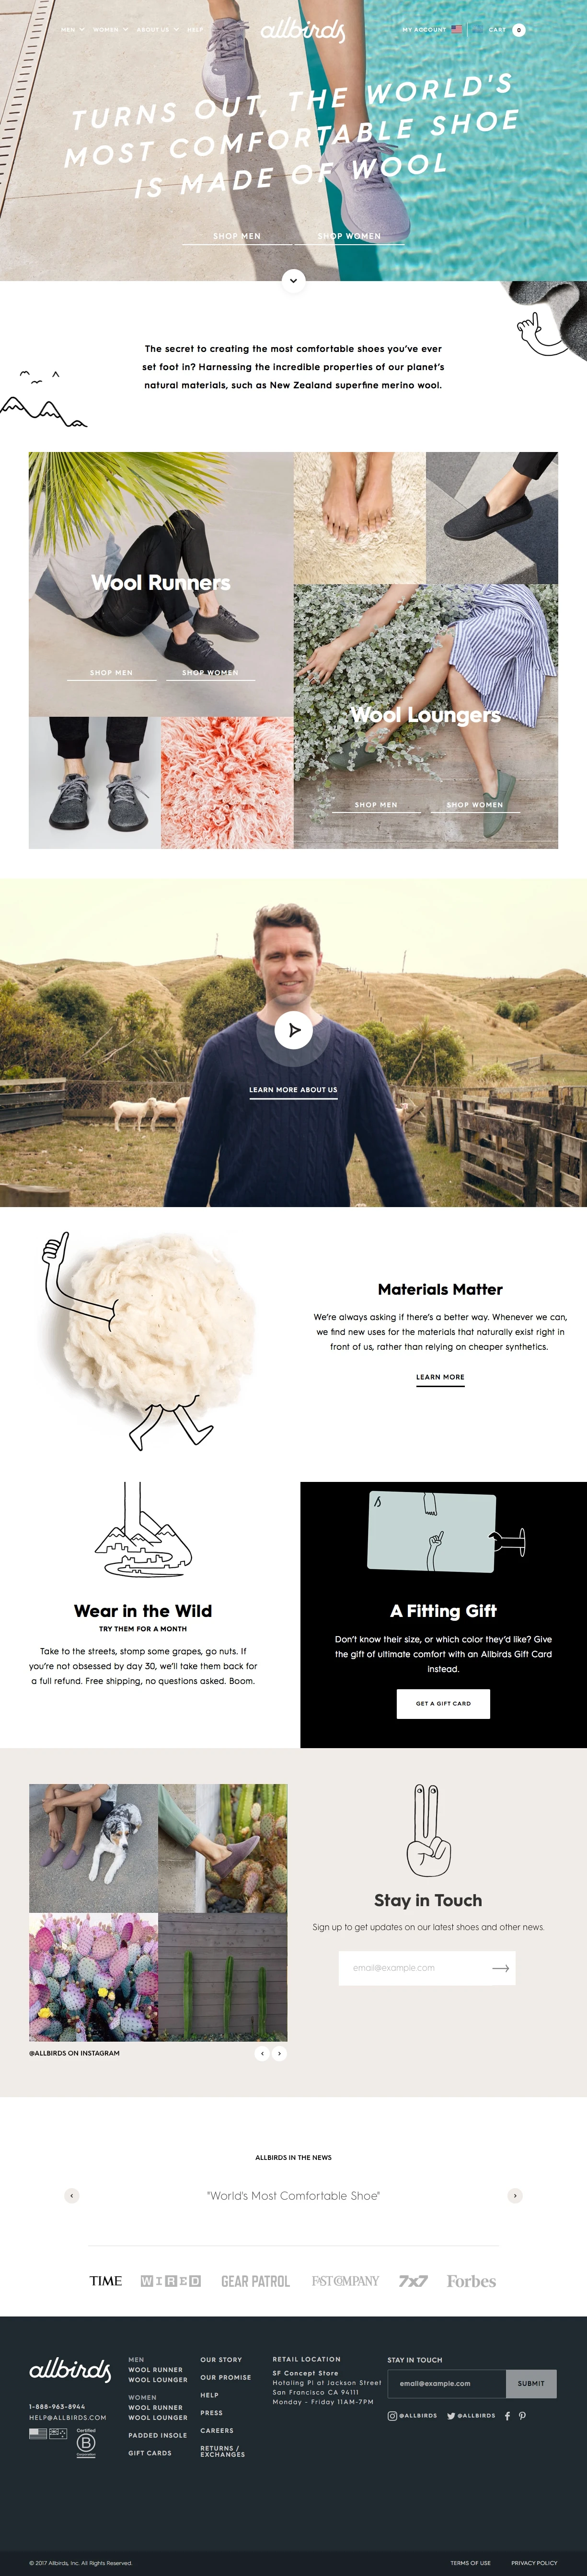 Allbirds Landing Page Example: Turns out superfine merino makes the world's most comfy shoes.